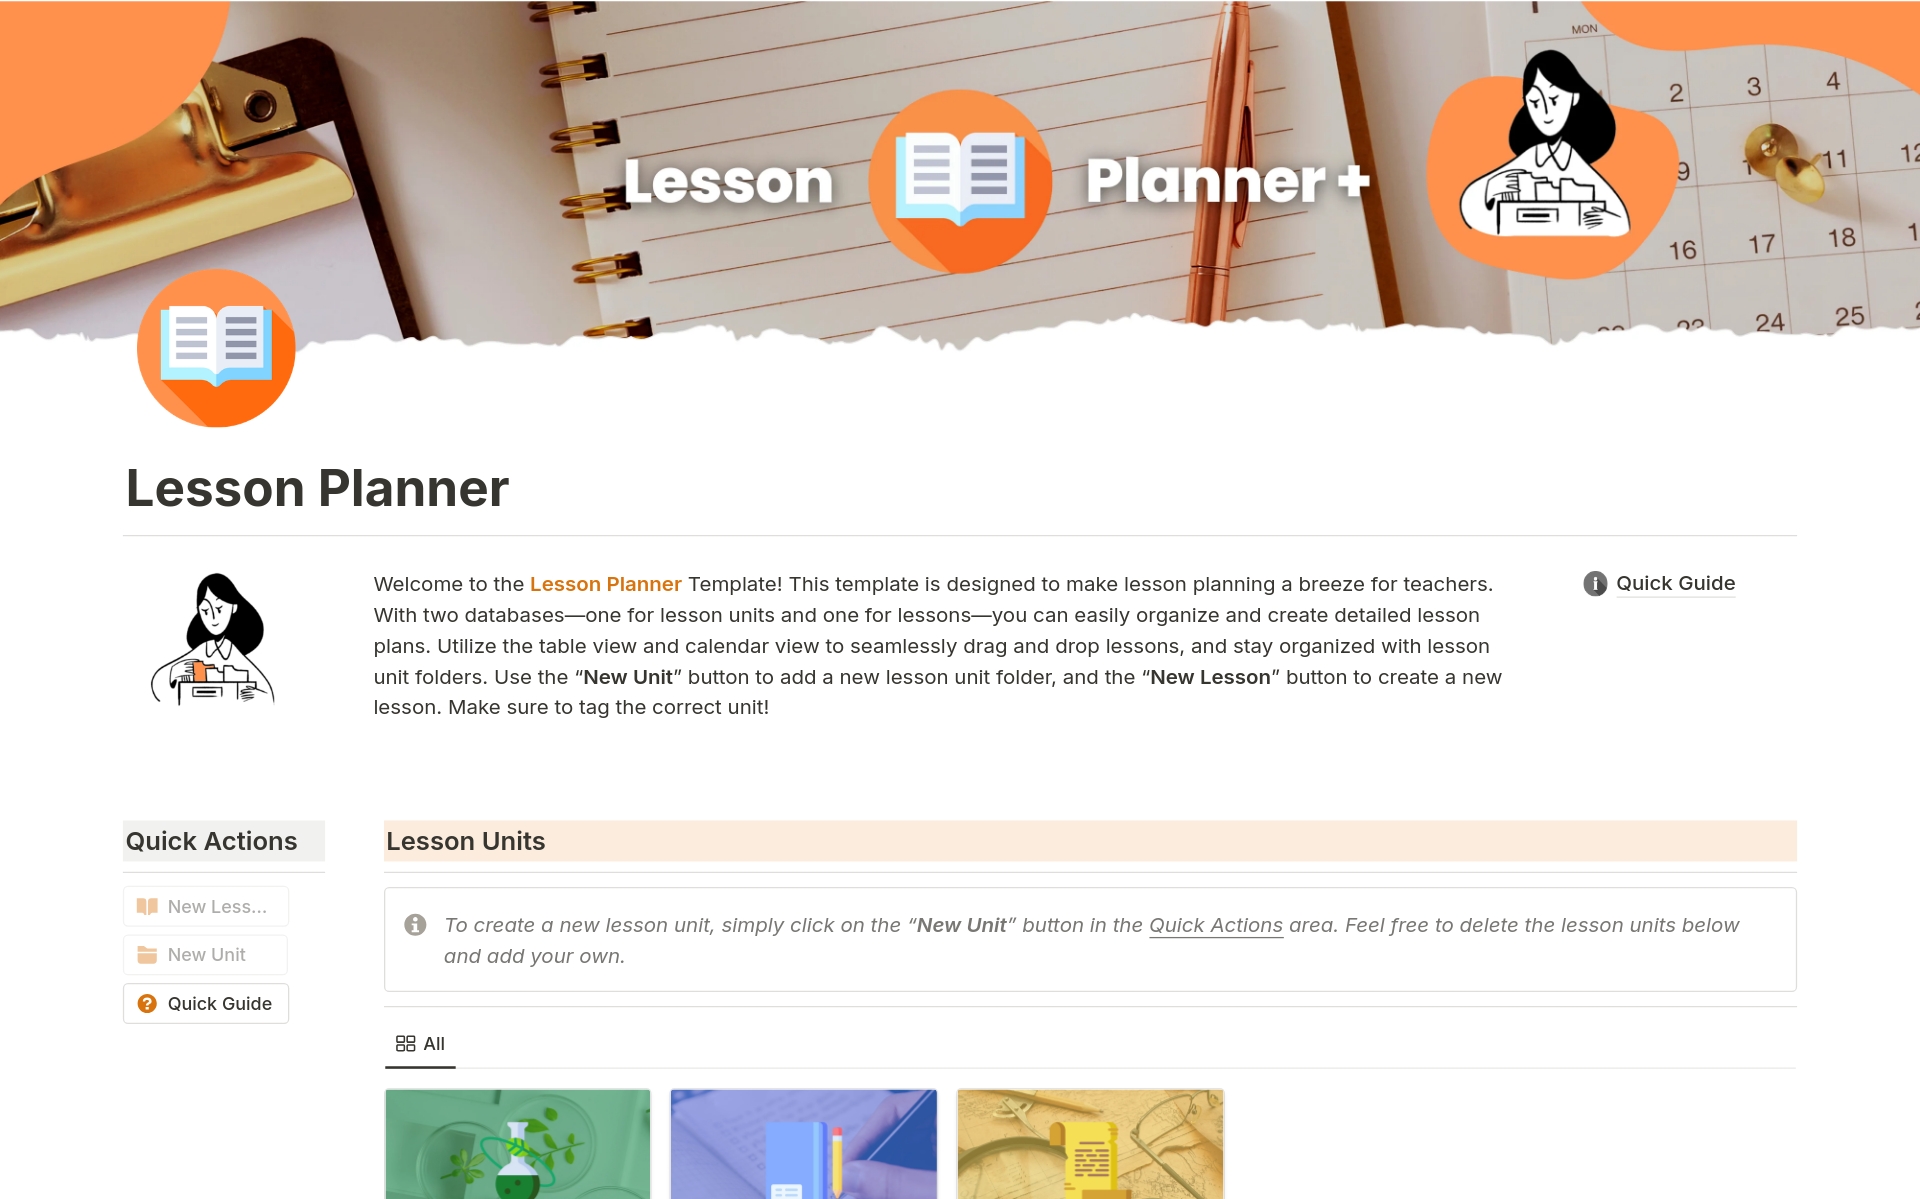 All-in-one tool for teachers to effortlessly create, and organize lesson plans, saving valuable time and eliminating the stress of manual record-keeping.